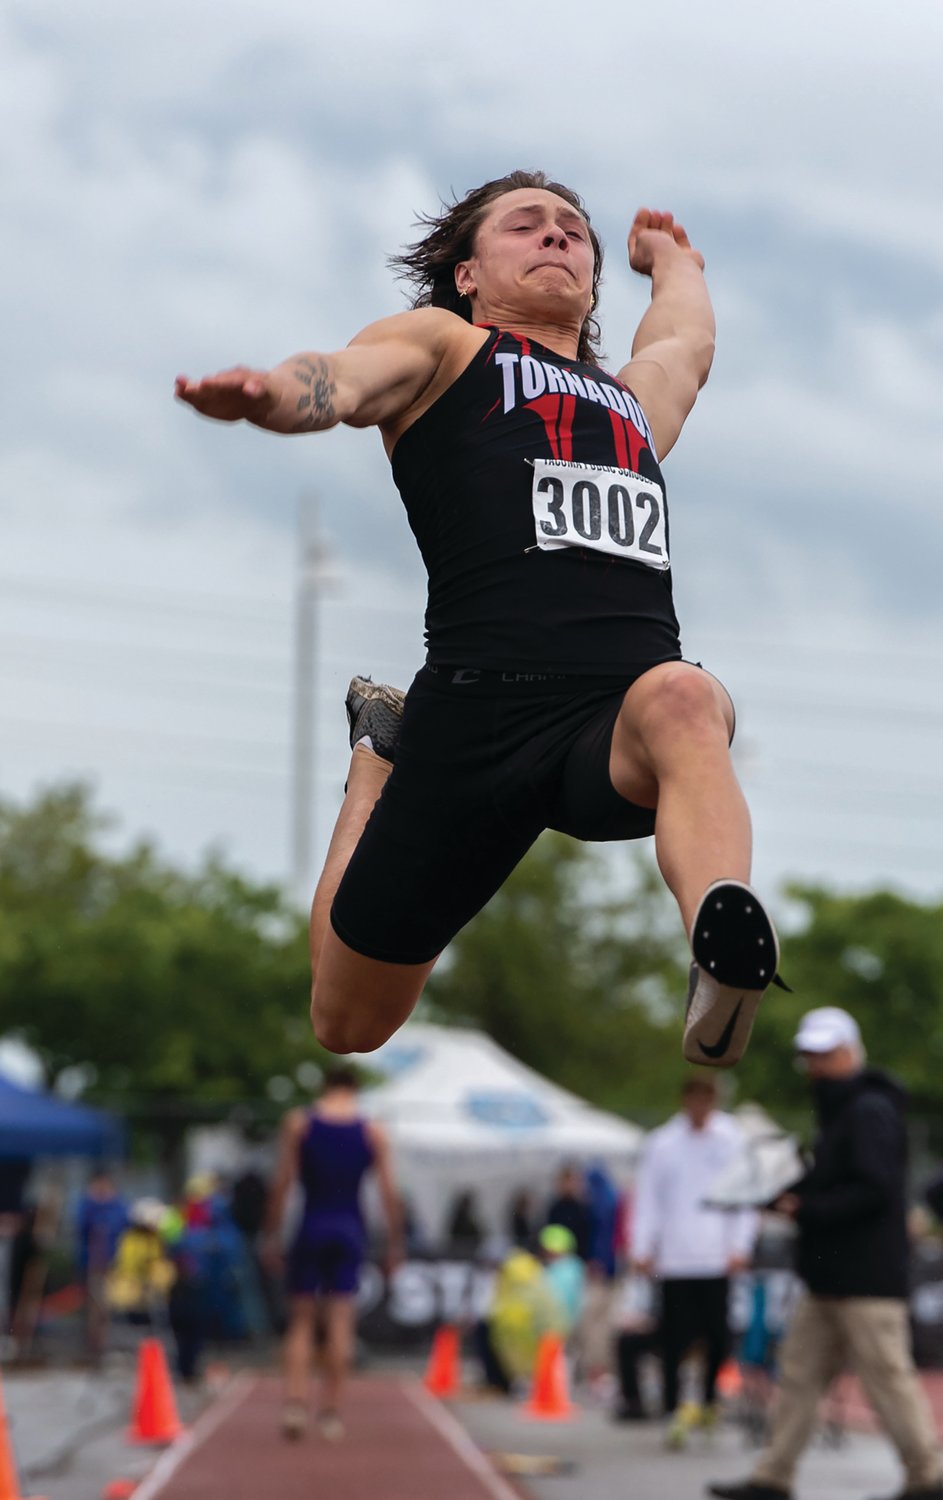 Yelm's Kyler Ronquillo long jumps at the 2A/3A/4A State Track and Field Championships on Thursday, May 26, 2022, at Mount Tahoma High School in Tacoma. Ronquillo finished third in the event with a jump of 22 feet, 5.5 inches.